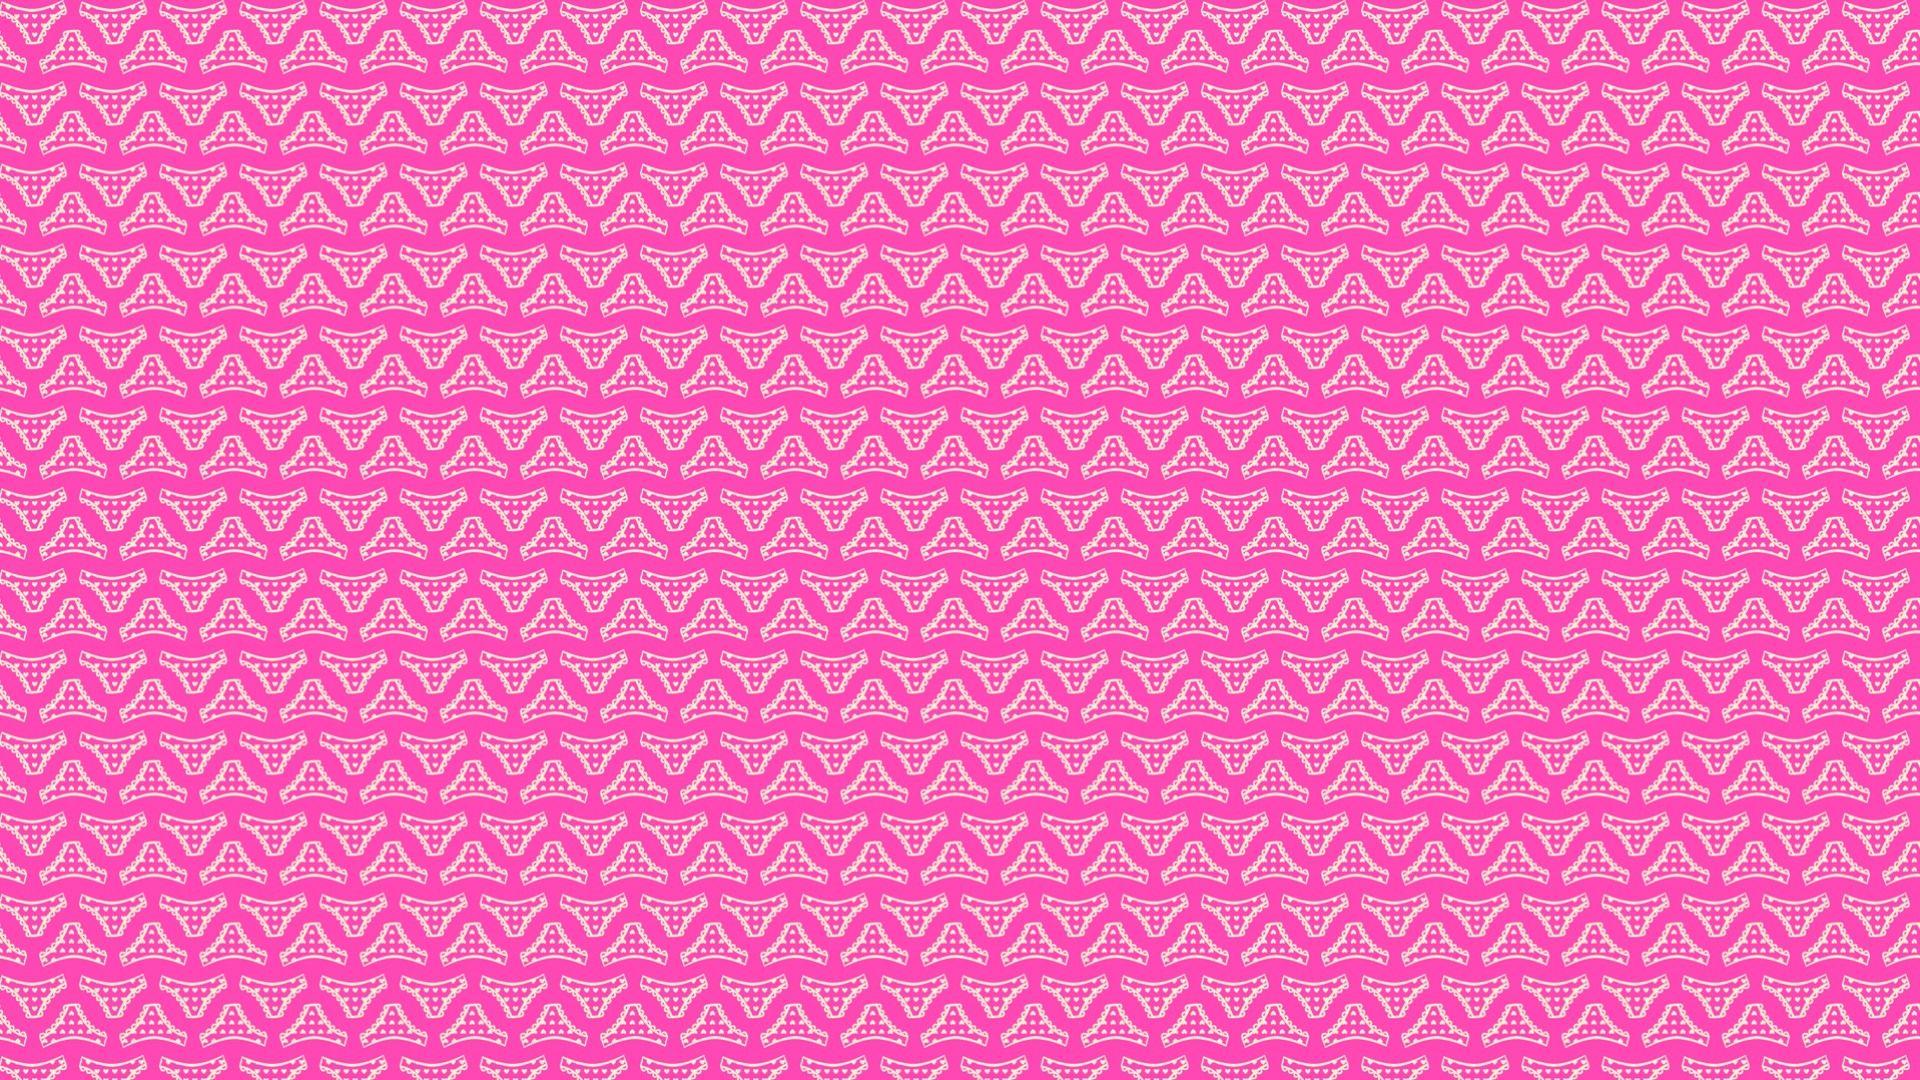 background twitter tumblr pink 5. Background Check All